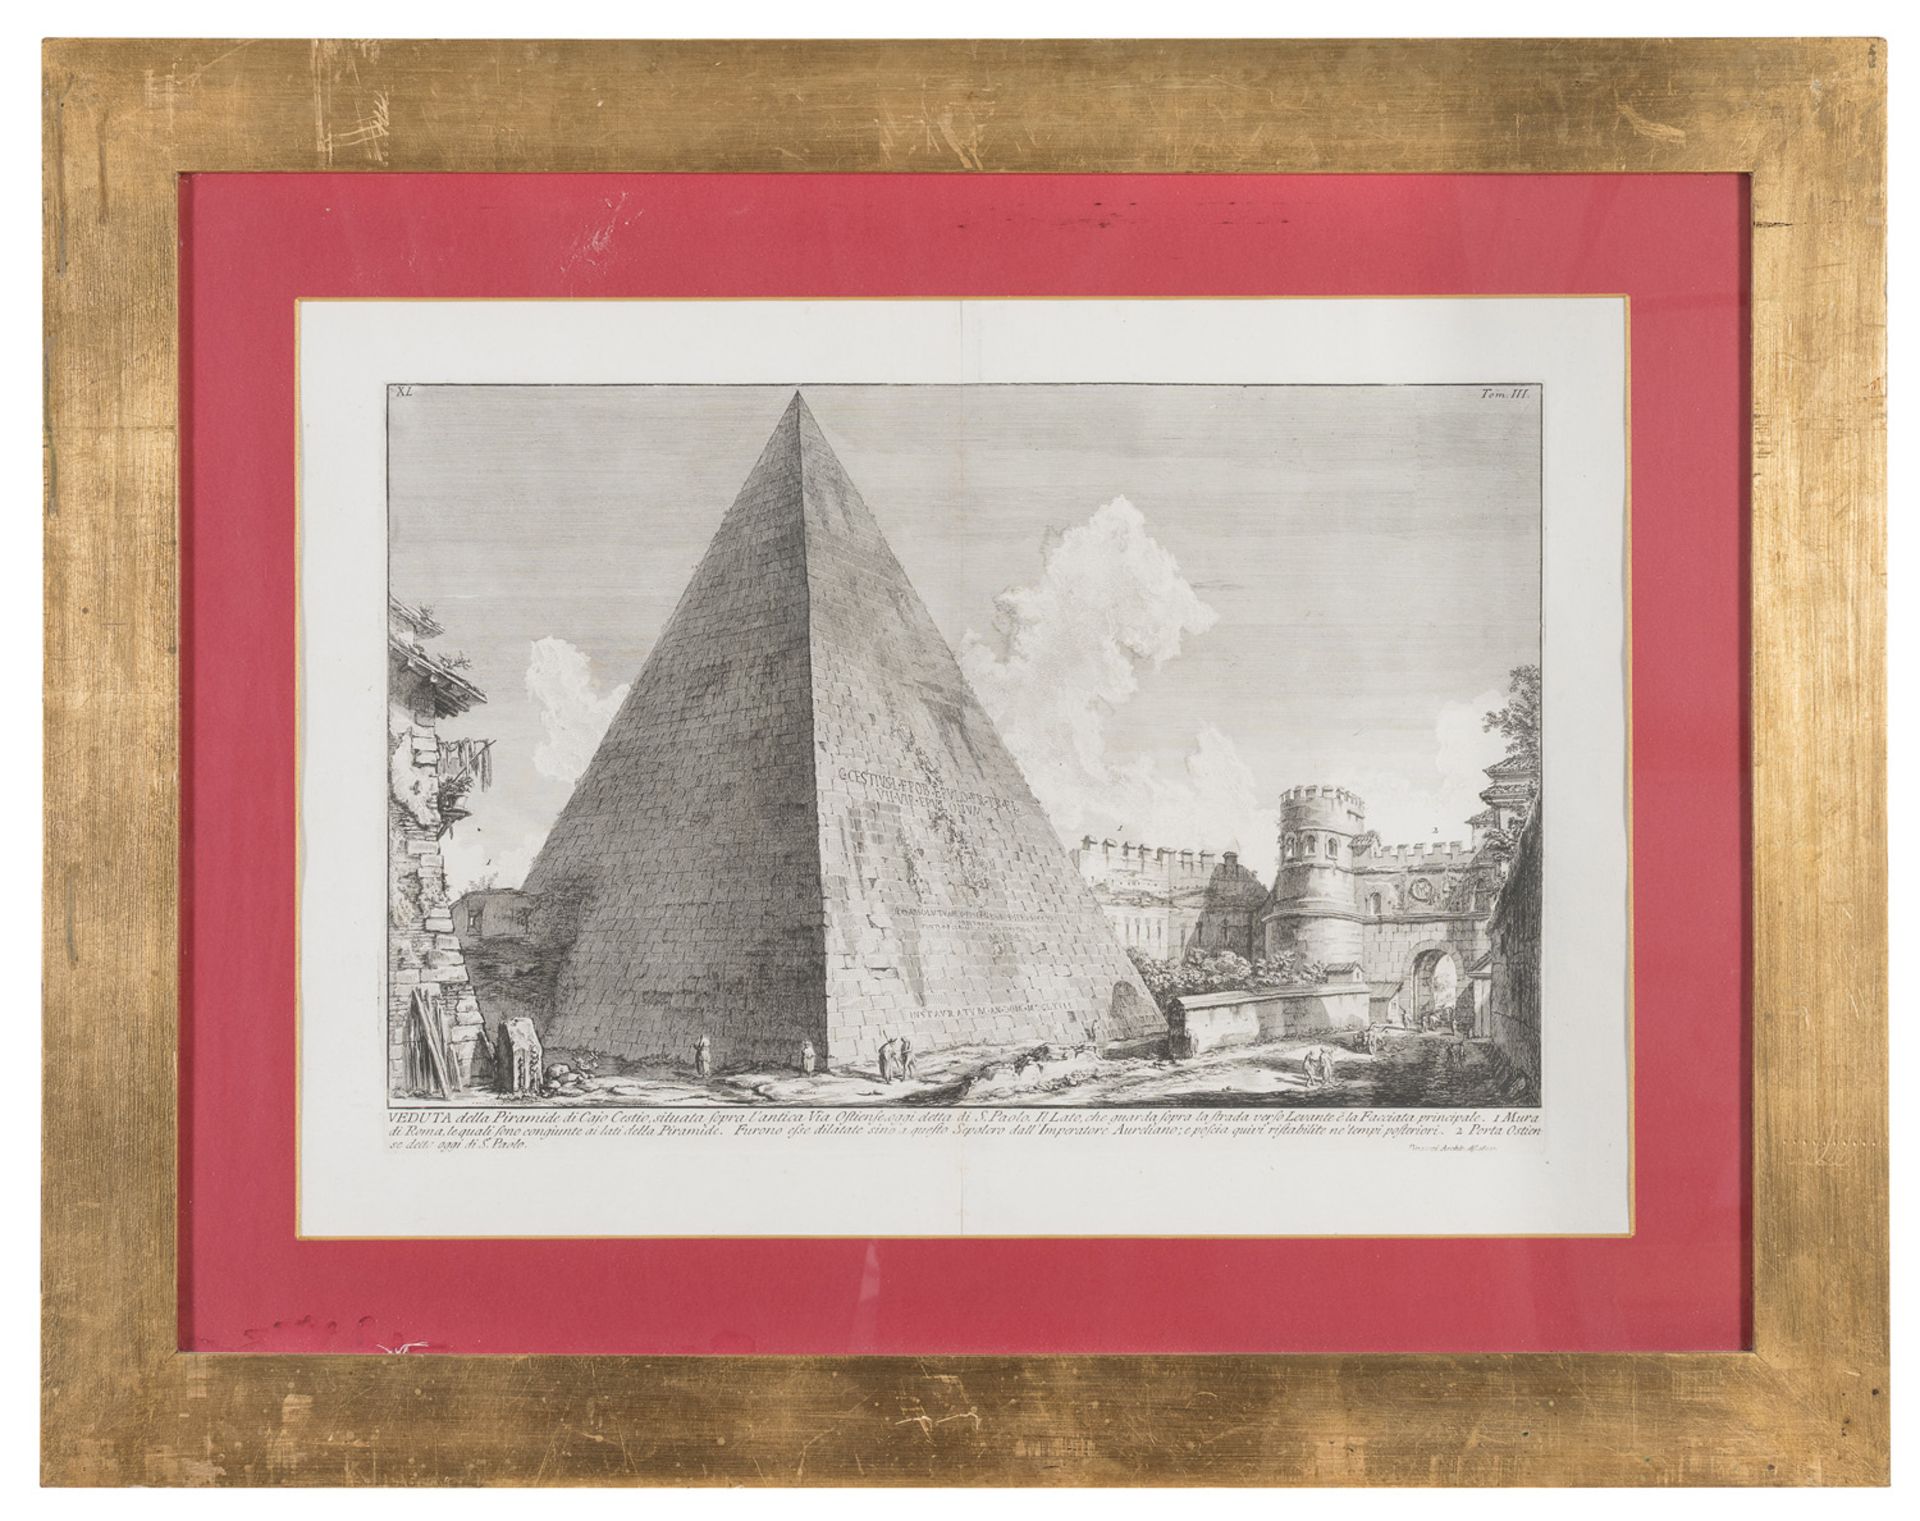 ENGRAVING OF THE CAIO CESTIO PYRAMID AFTER PIRANESI LATE 19TH CENTURY